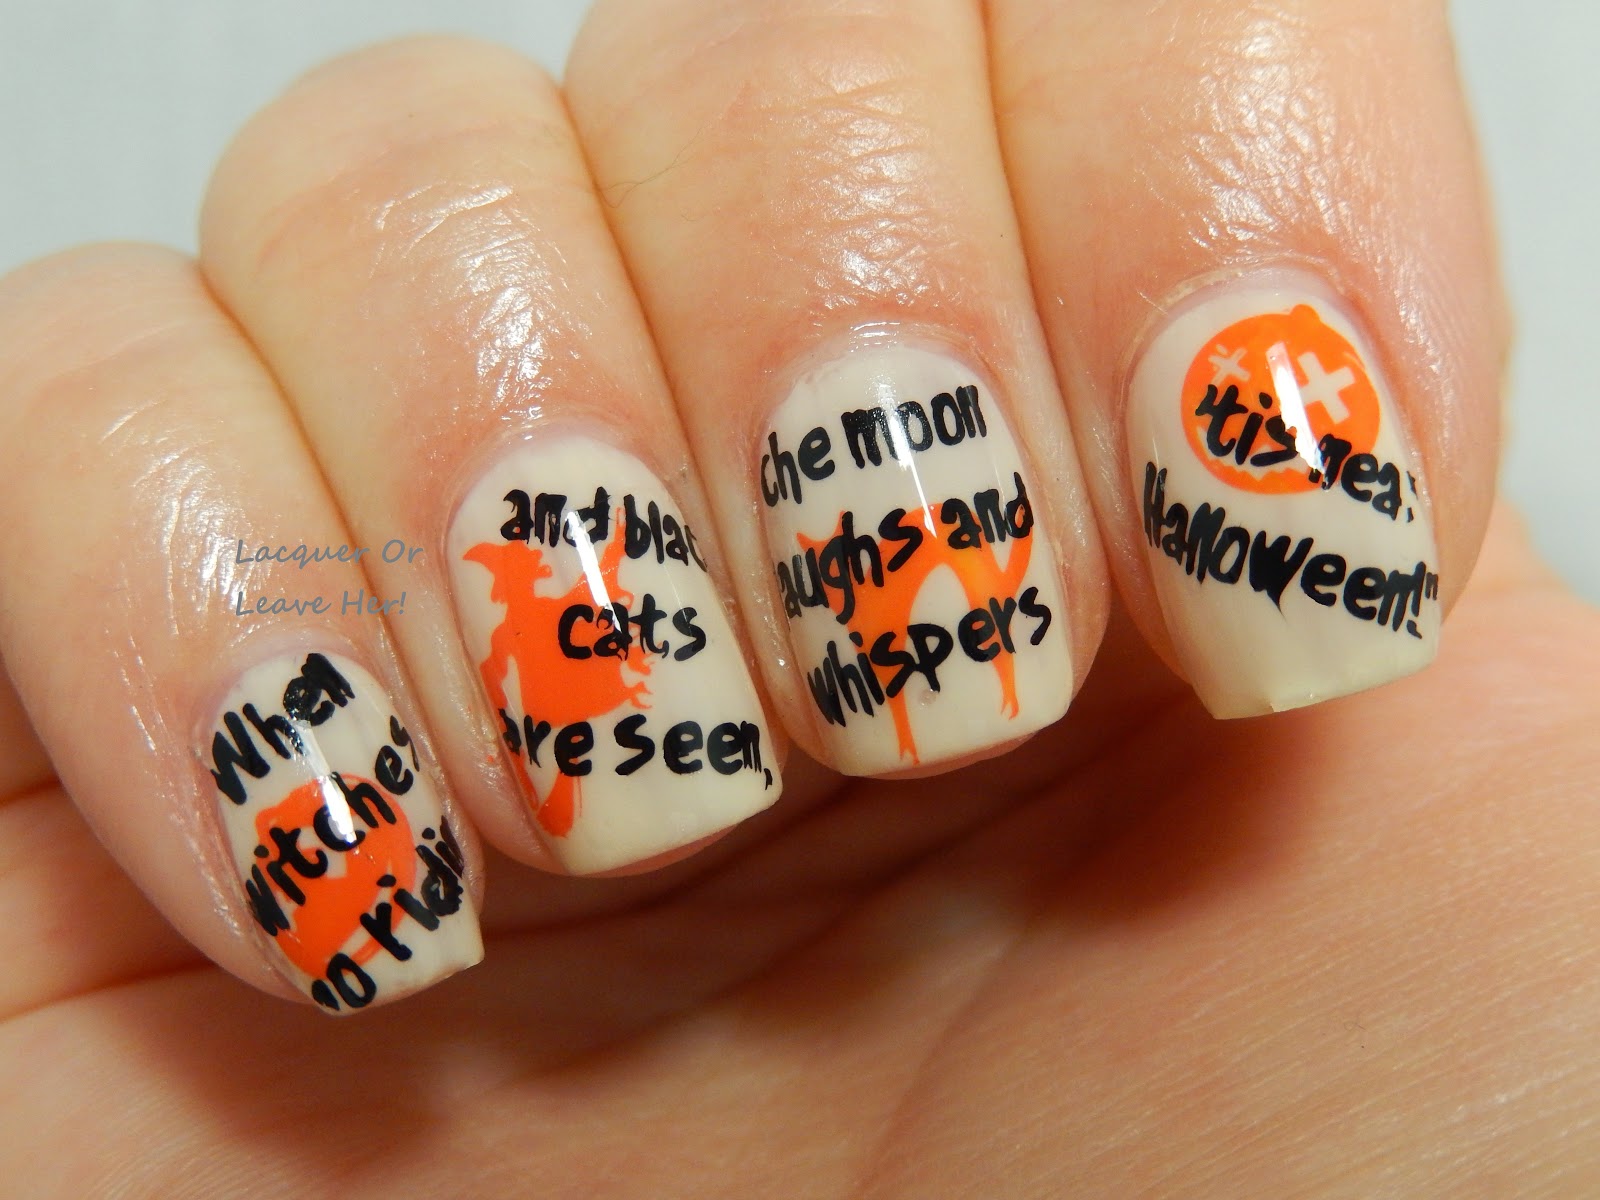 Lacquer or Leave Her!: NOTD: Whimsical Halloween Poem mani with ...